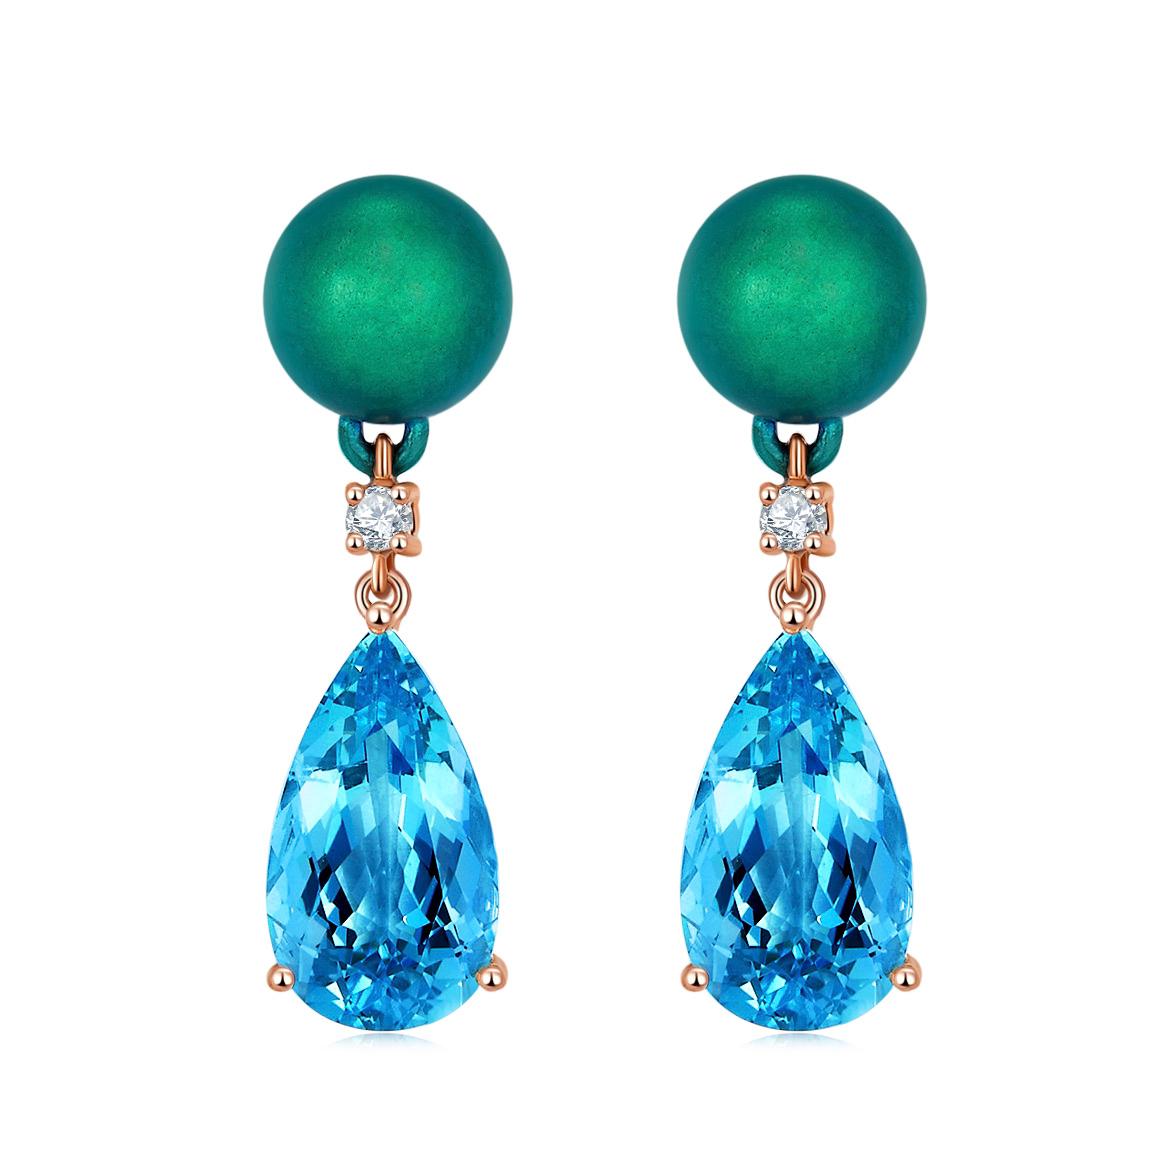 This is a very interesting earring as it is made of Titanium beads and 18K Rose Gold. The needle and the beads are made of Titanium and the surface has been oxidized to create this bluish green colour. The bead then connected to the Aquamarine